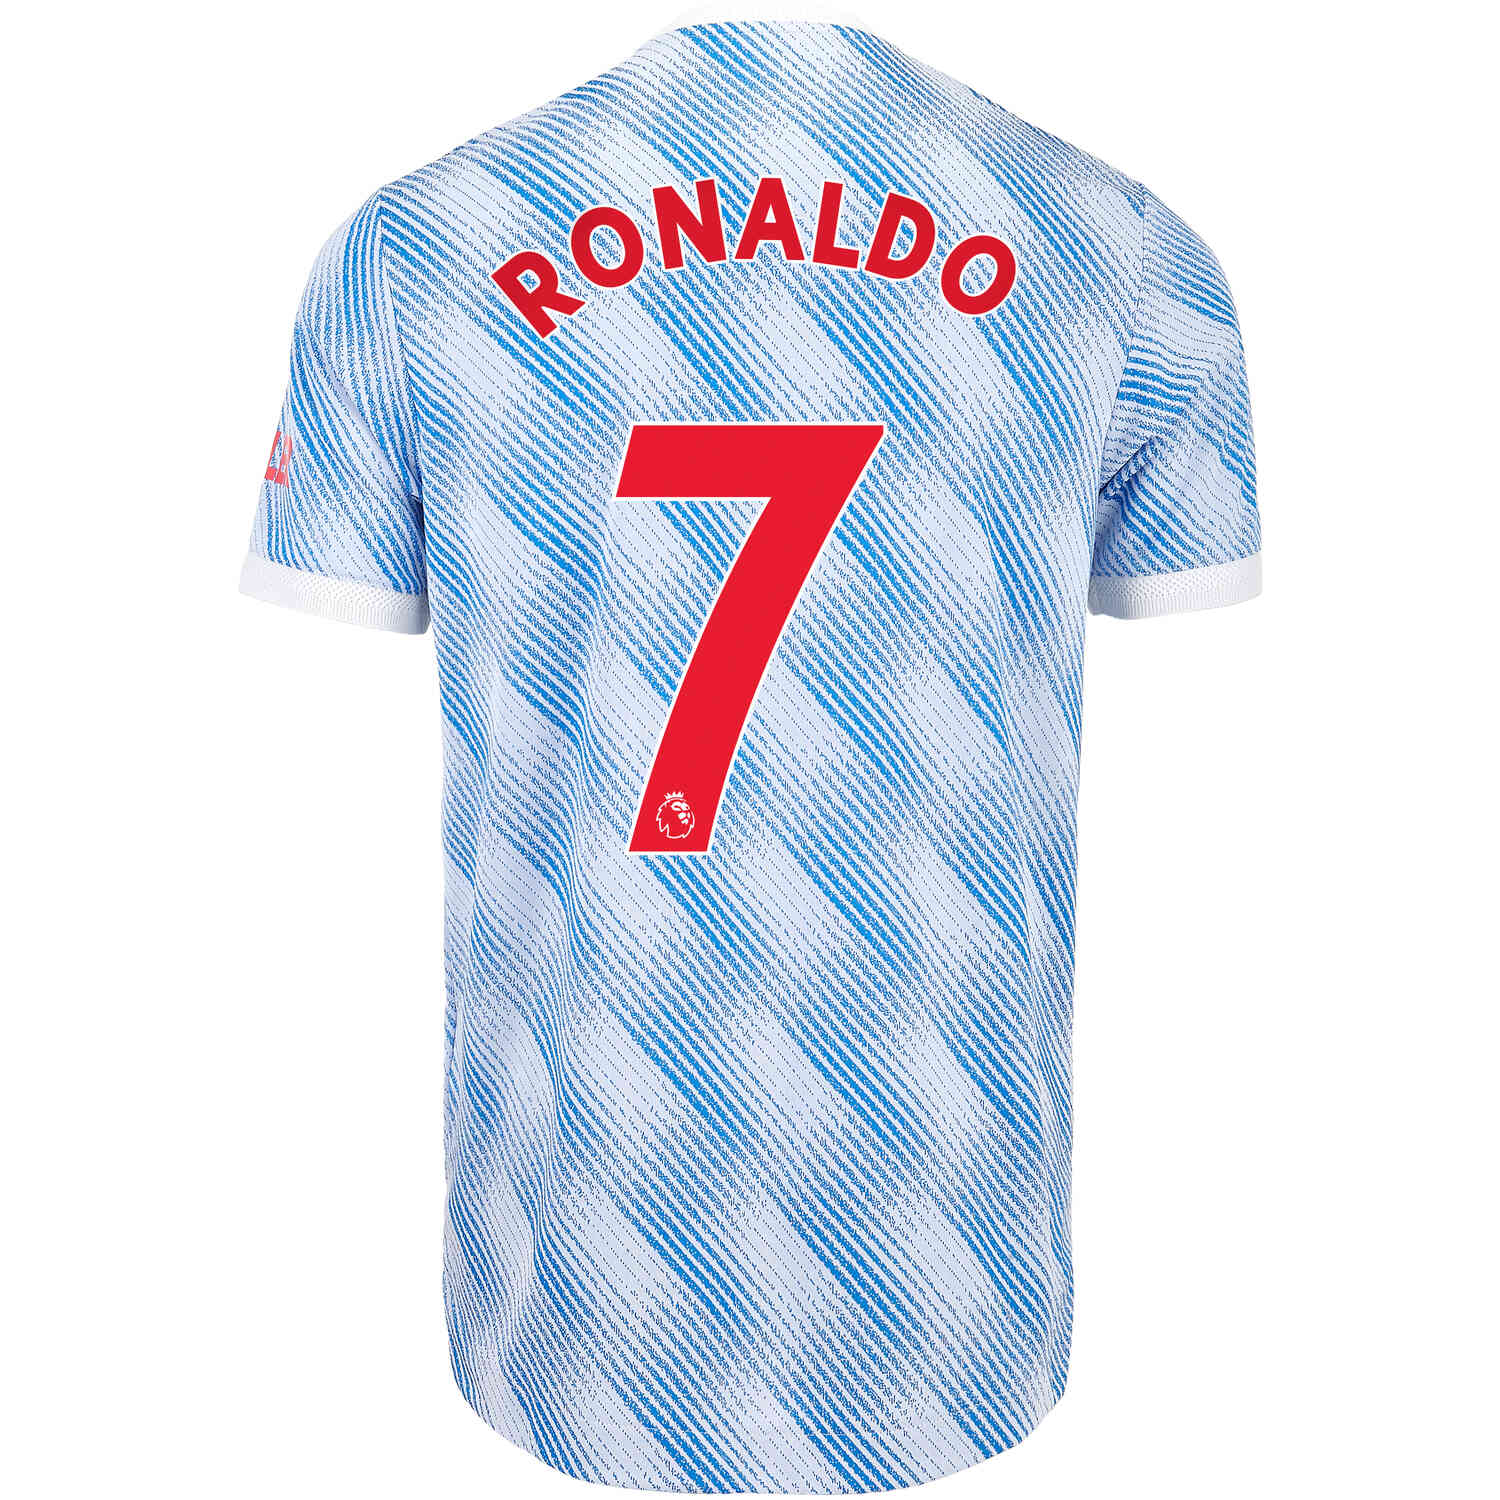 Portugal Cristiano Ronaldo #7 Soccer Jersey and Shorts Kids Youth Sizes Home and Away Football World Cup Premium Gift